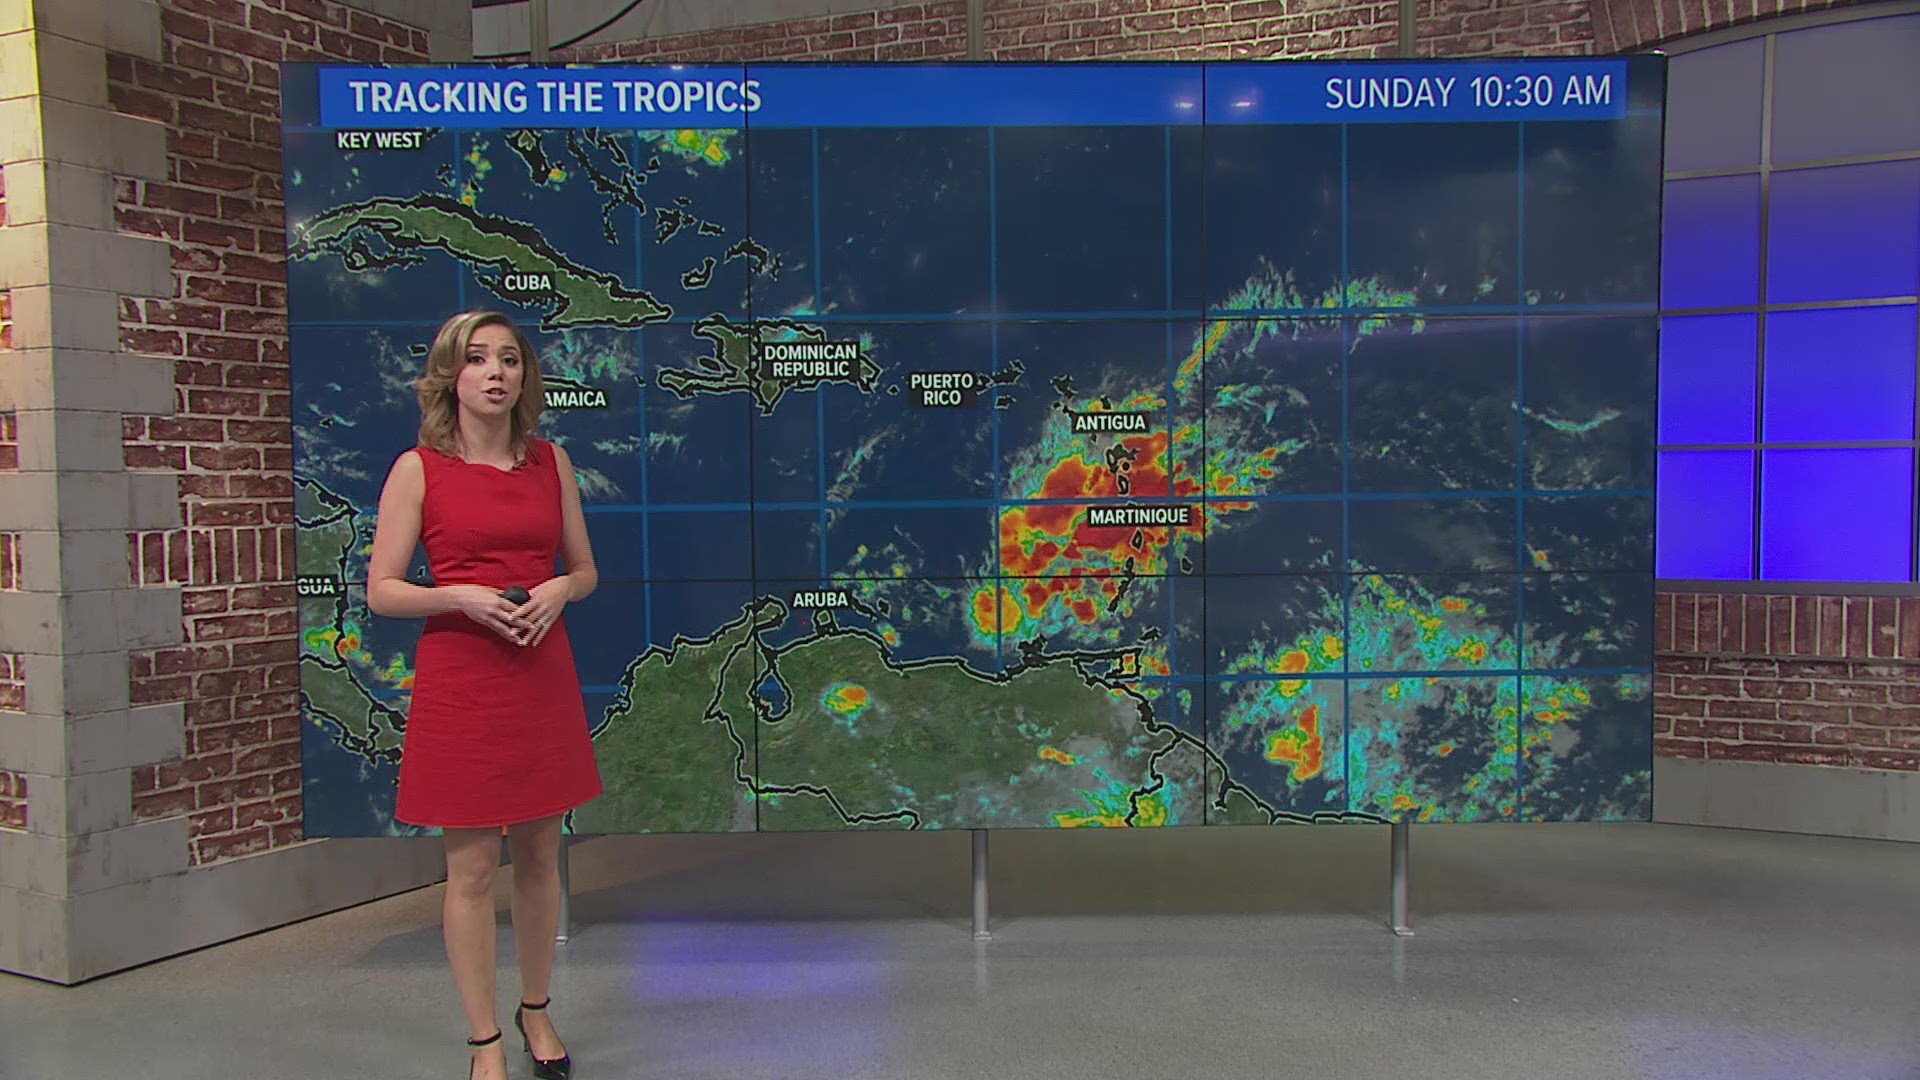 The tropics may start to heat up this week as we track a tropical wave moving westward towards PR, Hispanola, and Cuba.